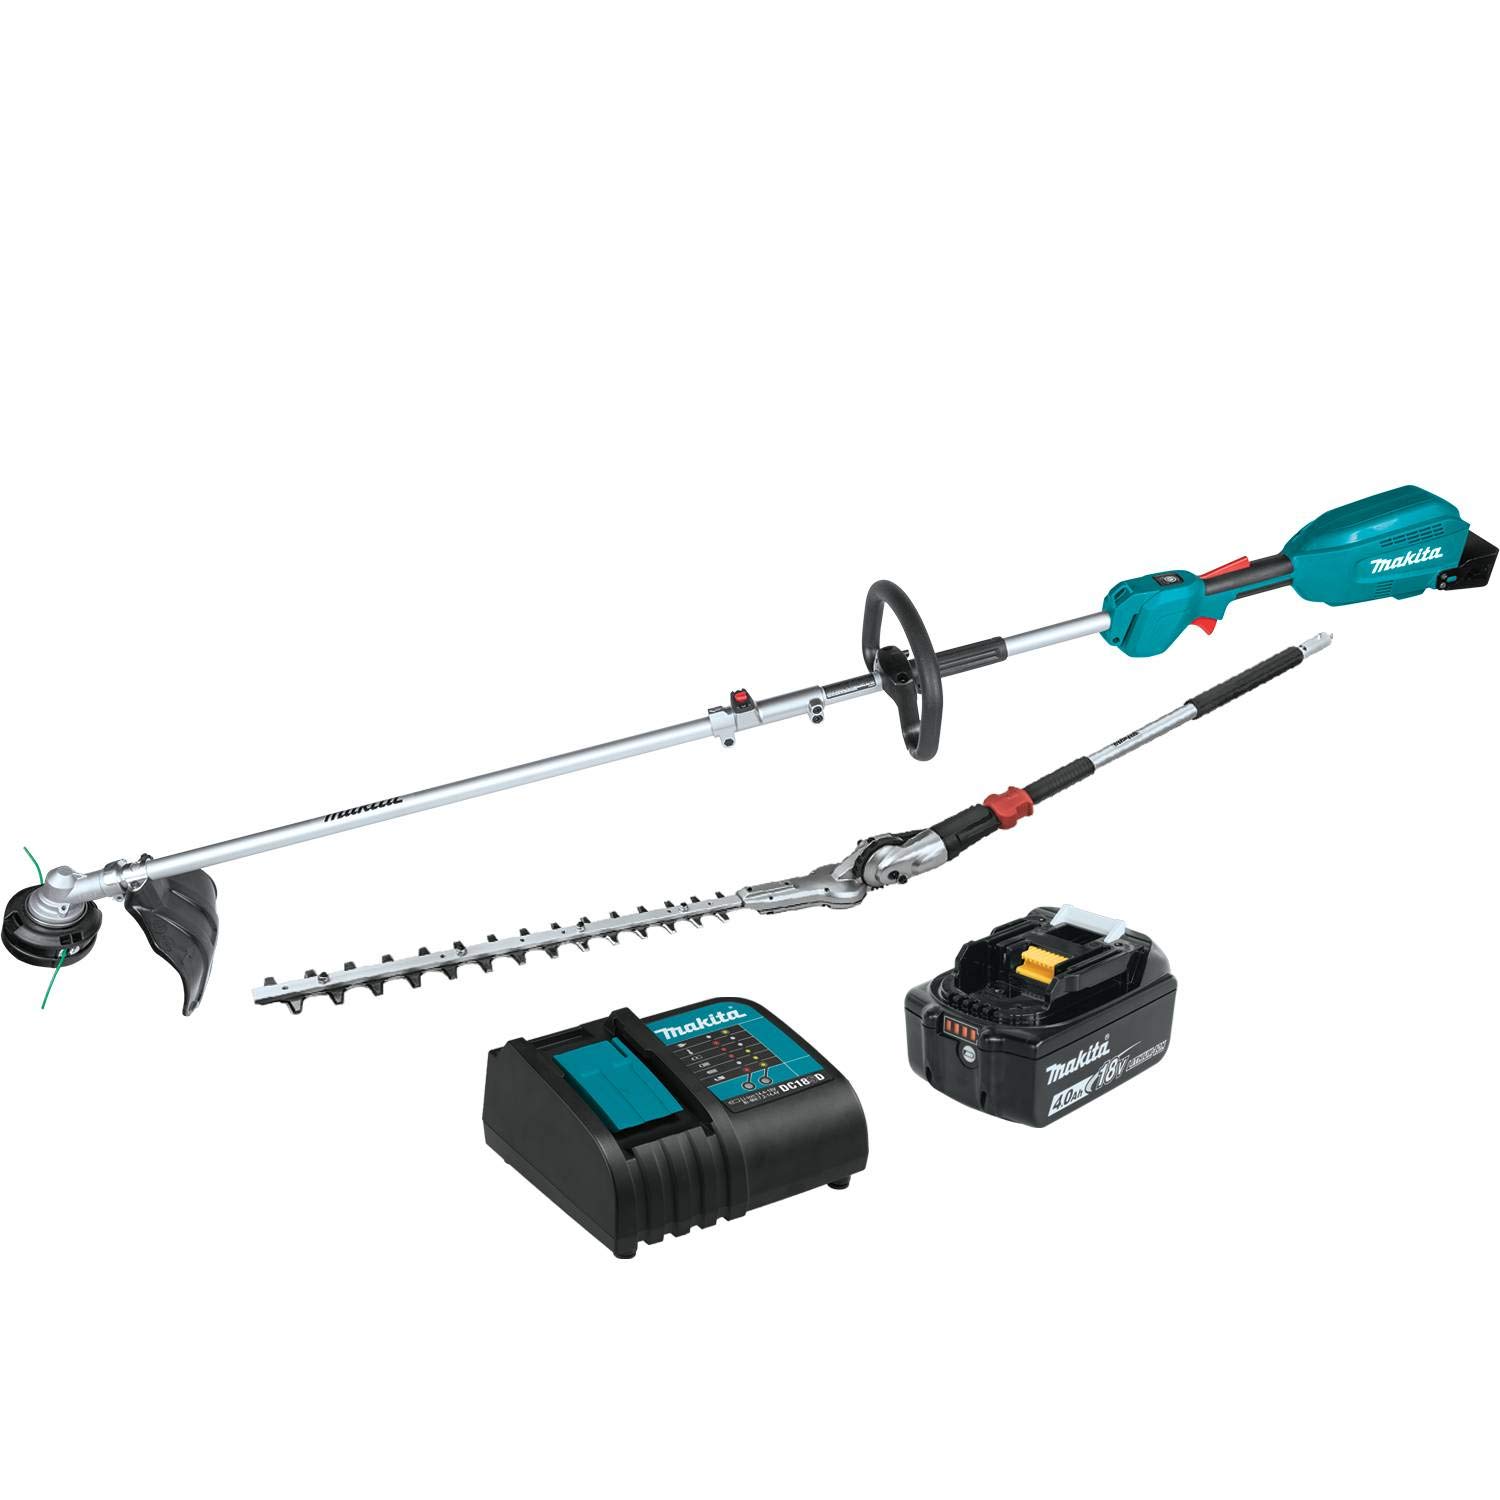 TKM Home Makita XUX02SM1X2 18V LXT Lithium-Ion Brushless Cordless Couple Shaft Power Head Kit w/ 13" String Trimmer & 20" Hedge Trimme?